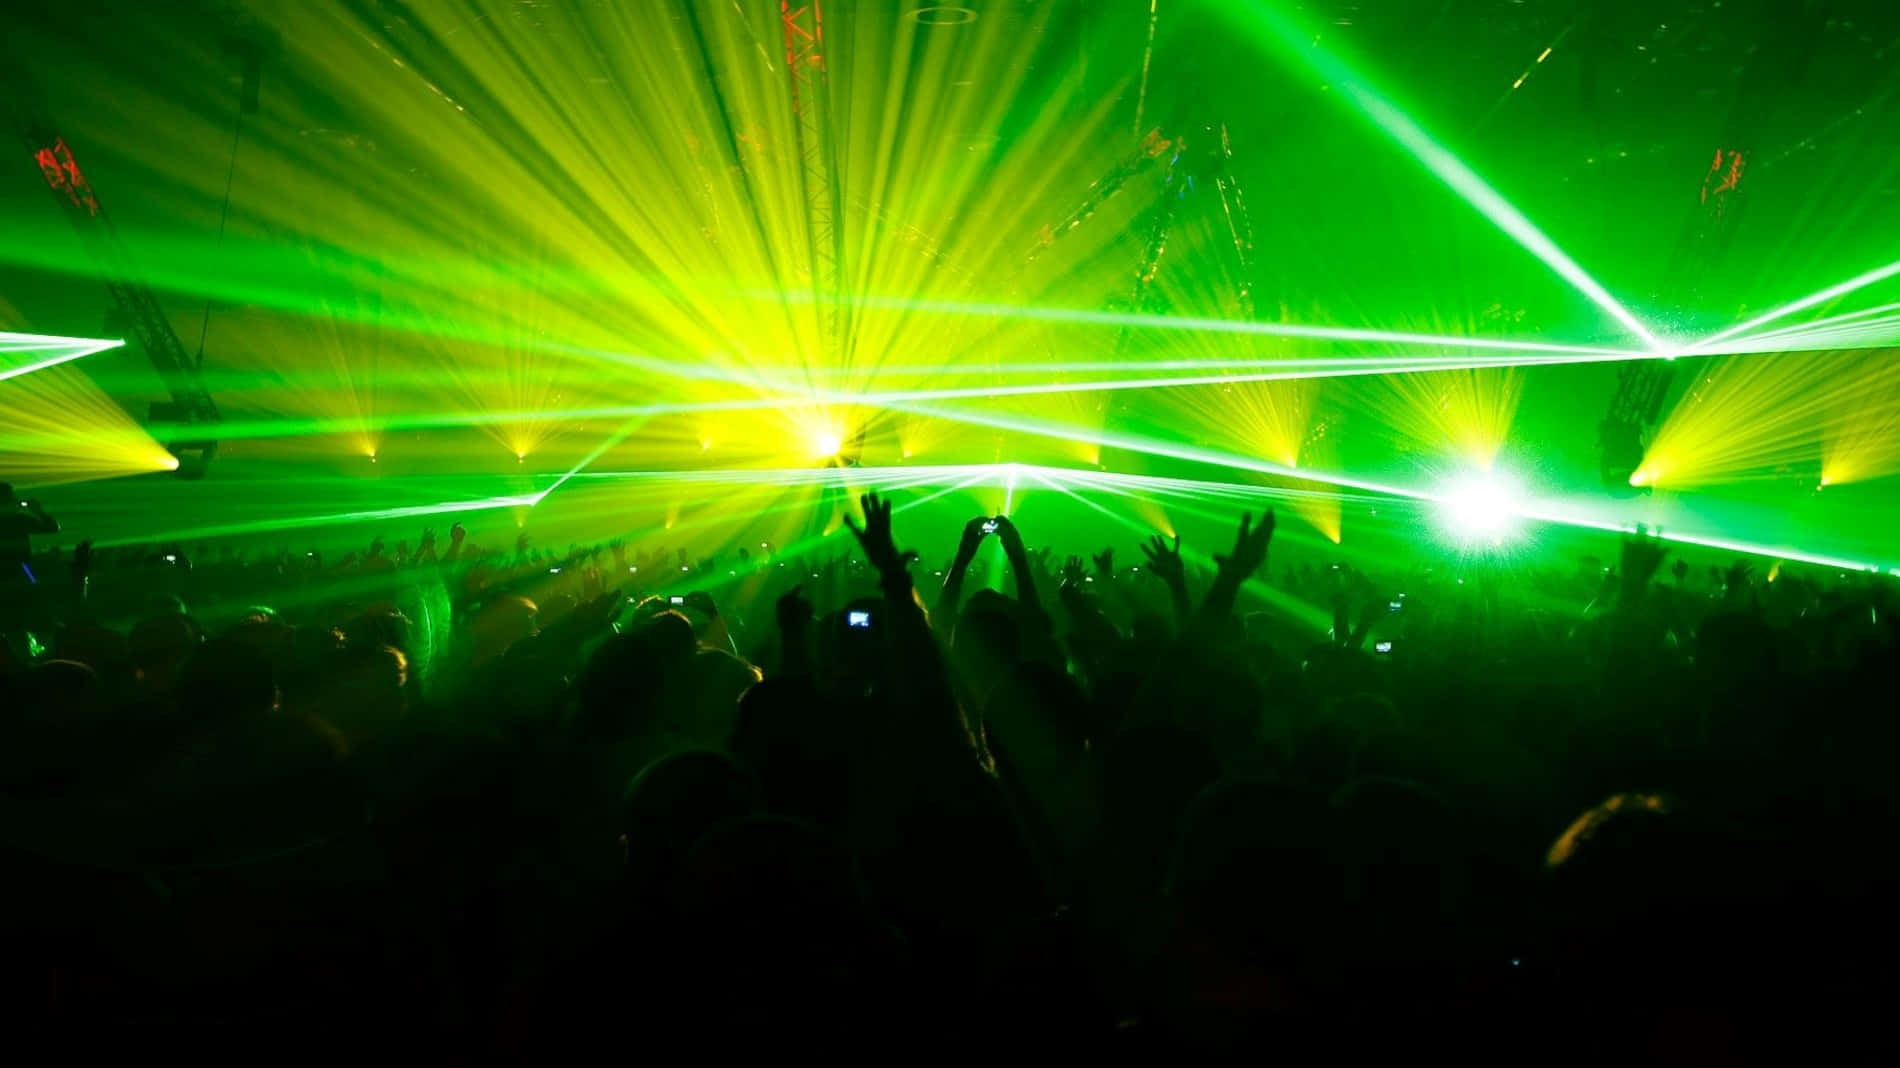 A Crowd Of People At A Concert With Green Lasers